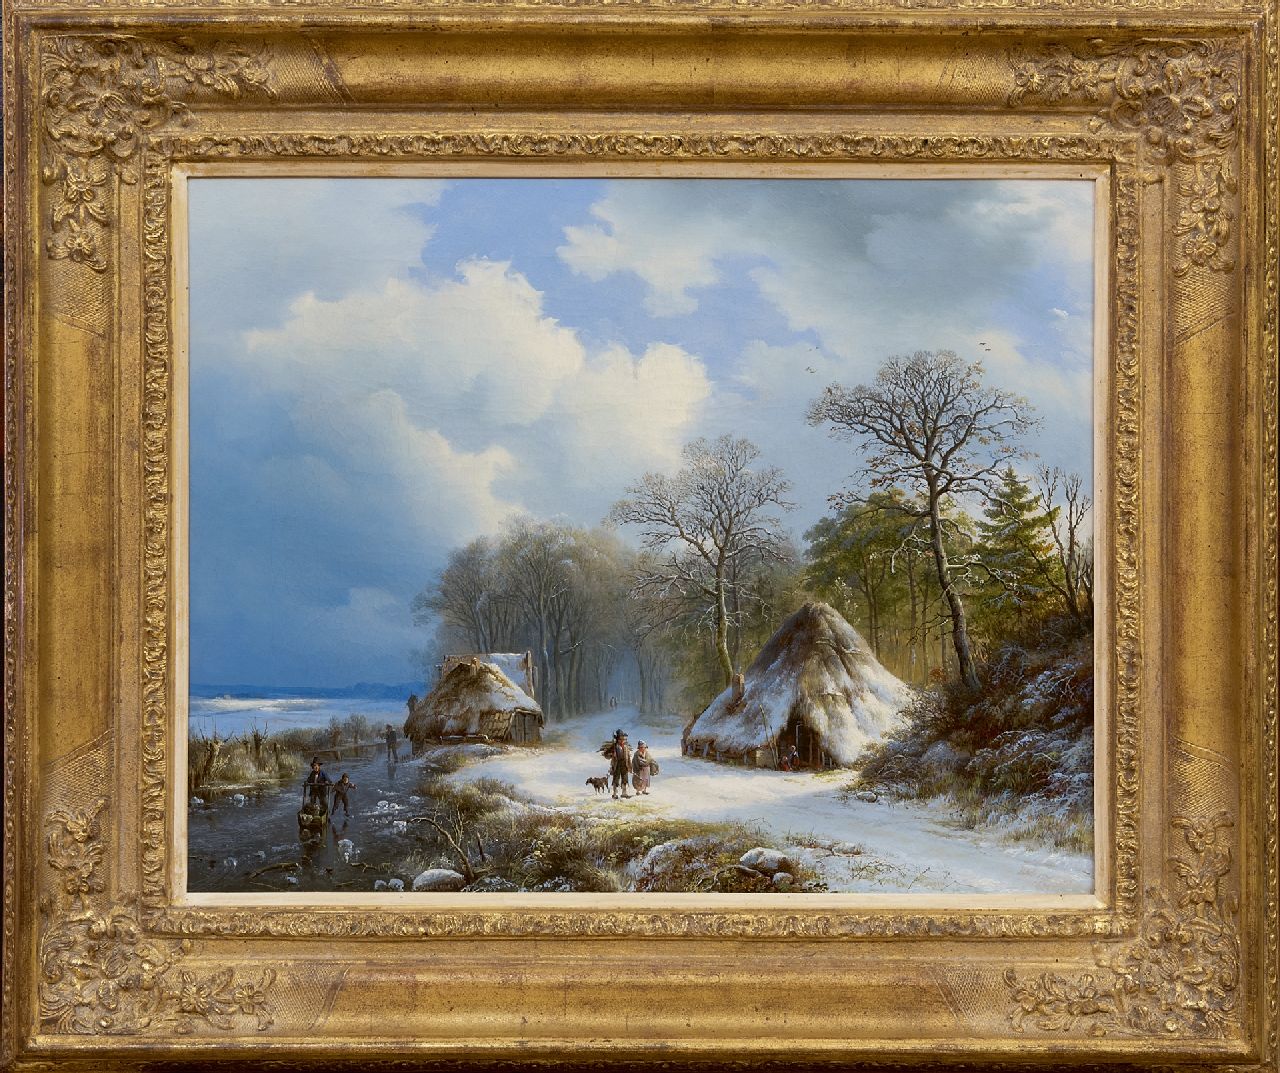 Bodeman W.  | Willem Bodeman | Paintings offered for sale | A winter landscape with skaters and wood gatherers, oil on canvas 43.0 x 54.0 cm, signed l.c. and l.r. (indistinctly) and dated '38 and 1838